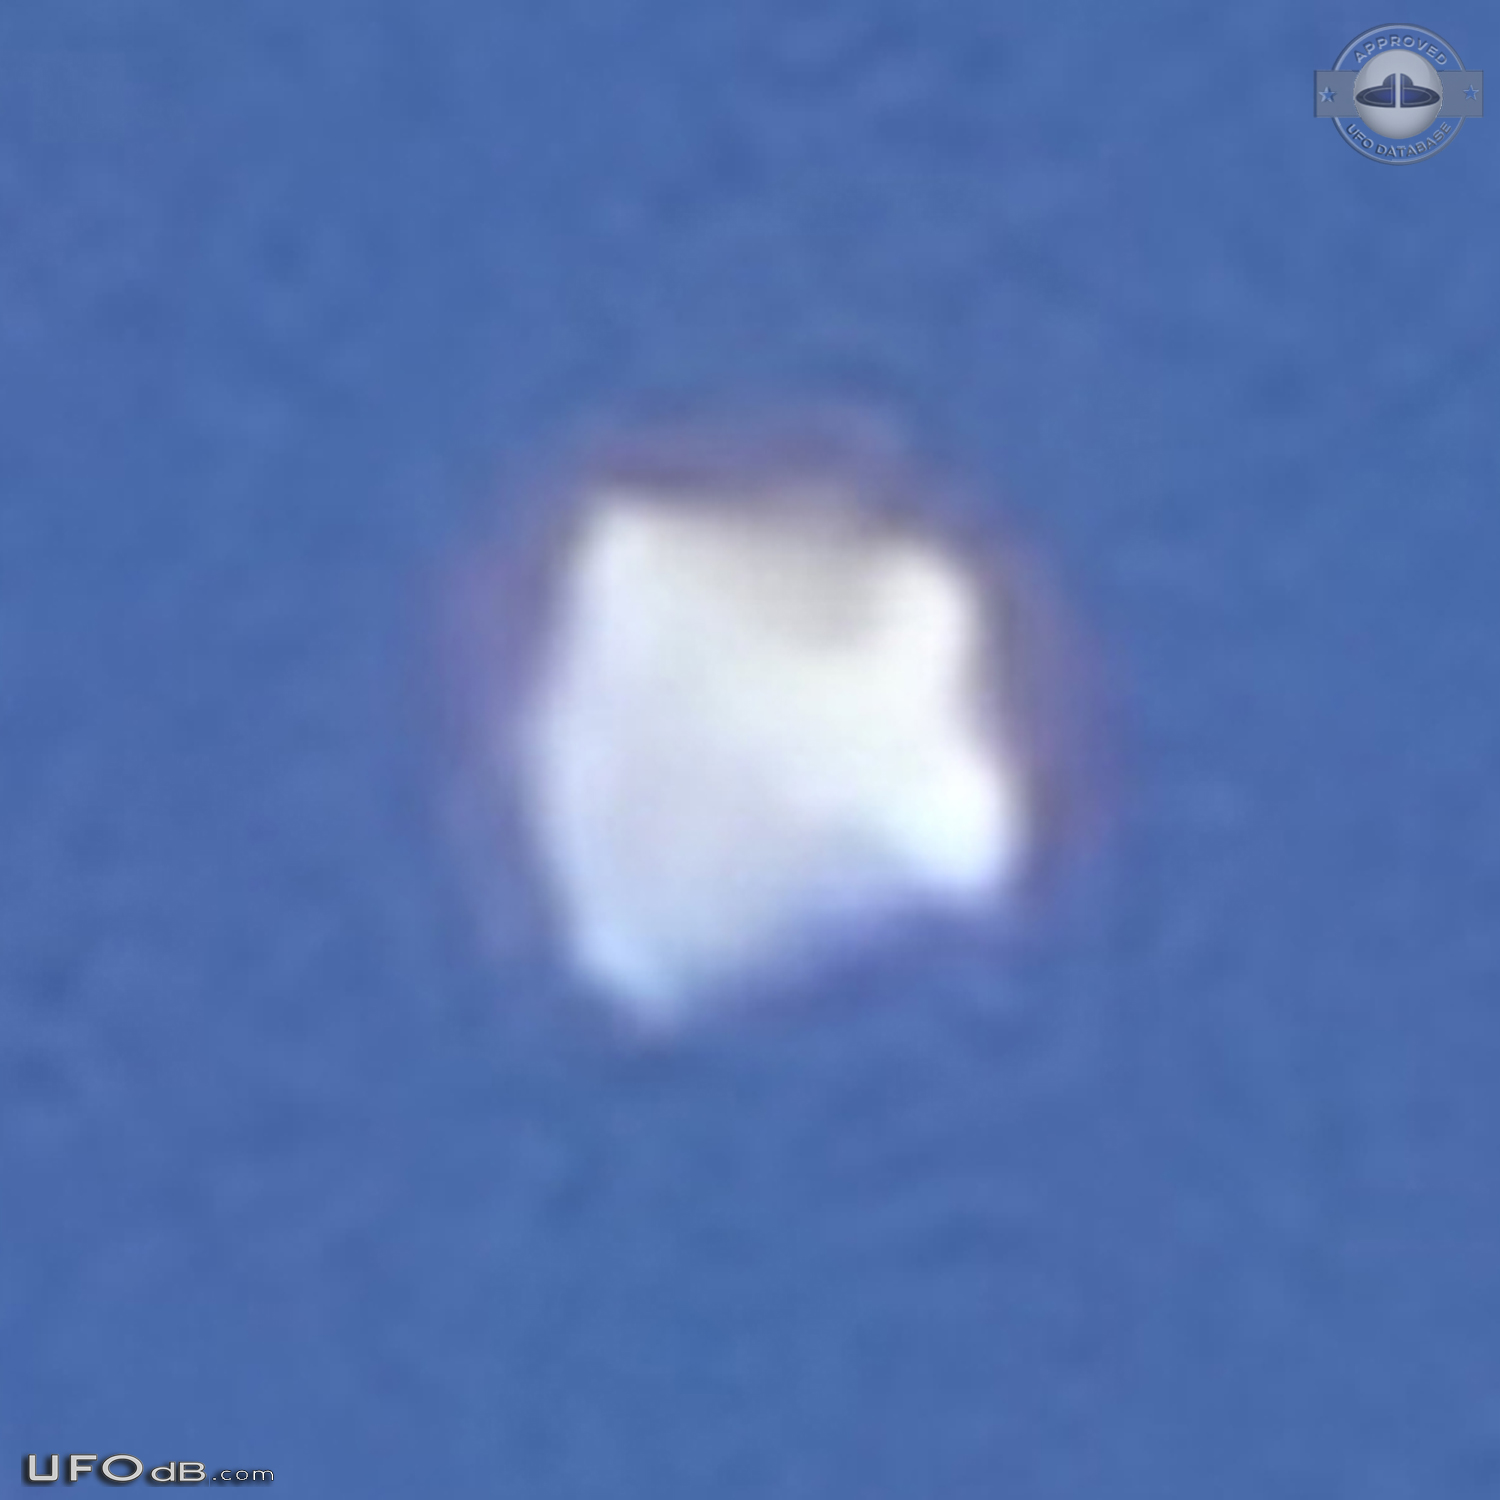 On the roof - man see flying UFO in Shahrekord Chaharmahal Iran 2015 UFO Picture #686-3